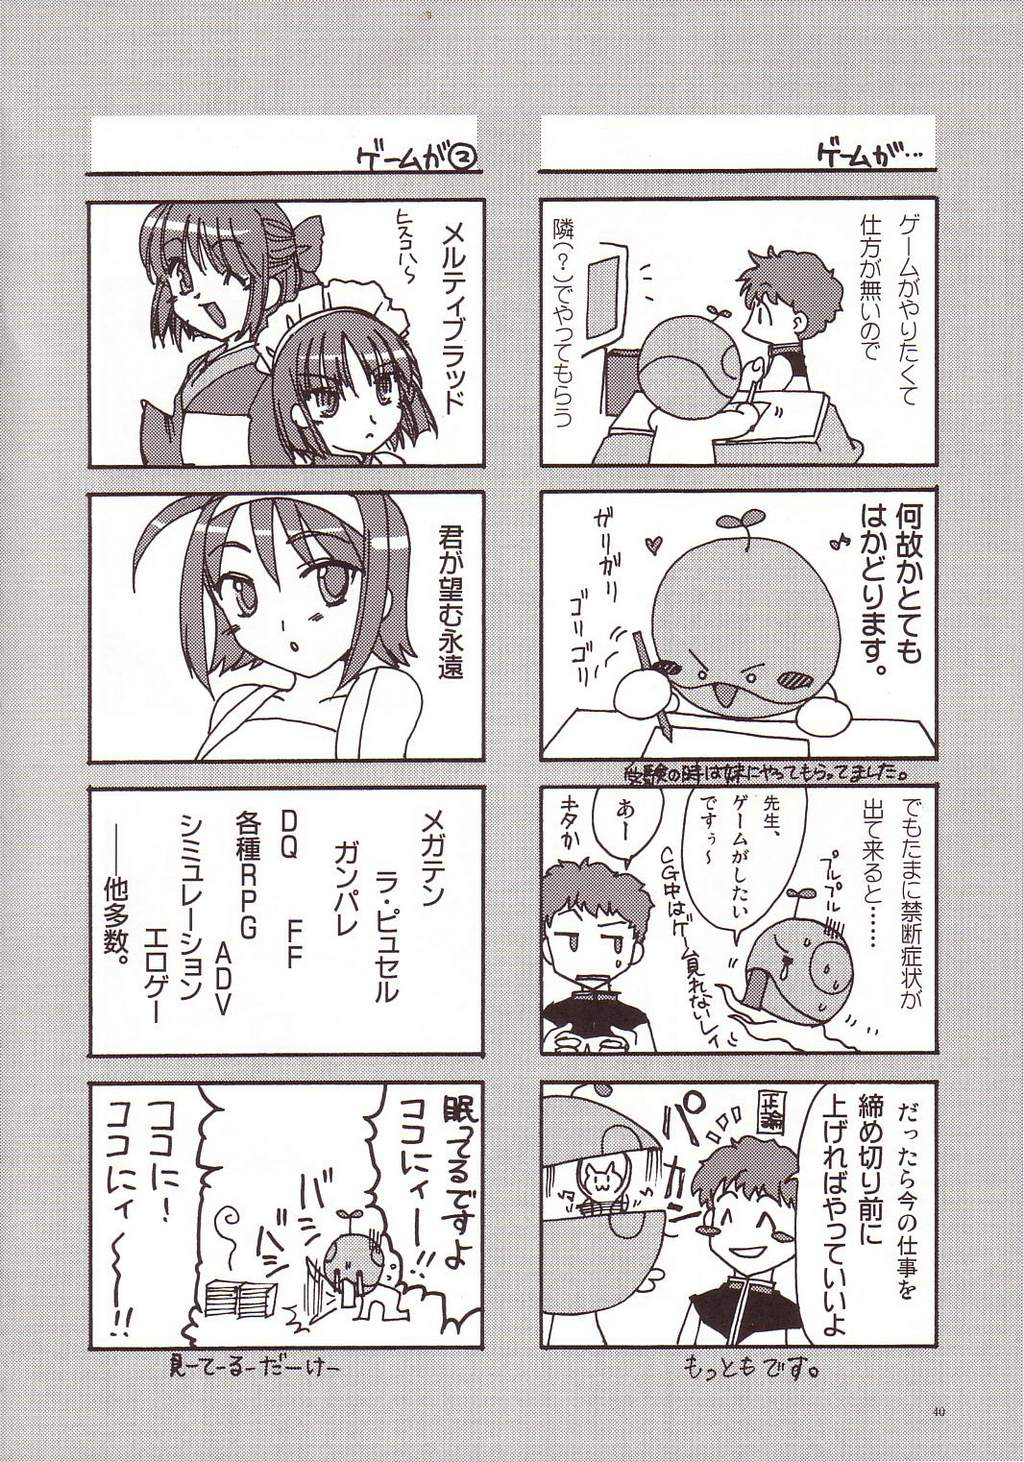 [AKABEi SOFT (Alpha)] Aishitai I WANT TO LOVE (Mobile Suit Gundam Char's Counterattack) page 39 full